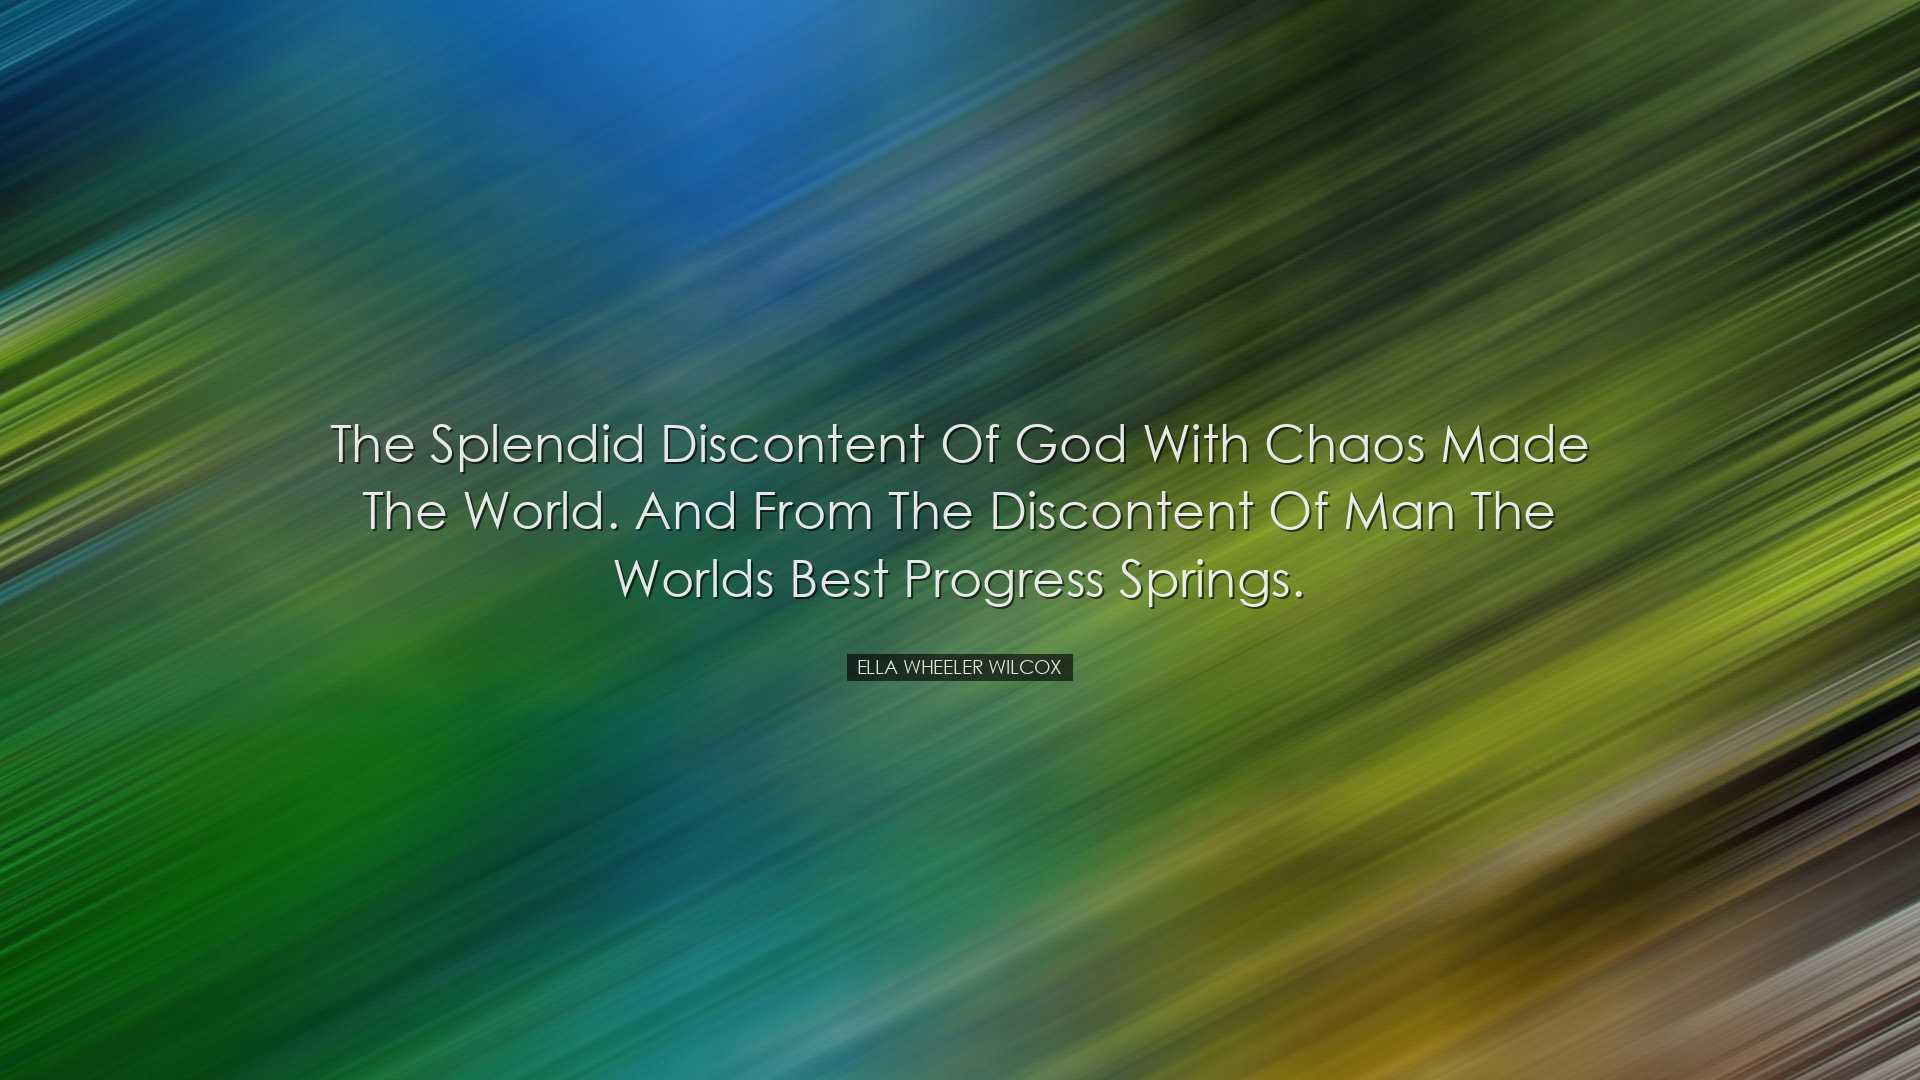 The splendid discontent of God With chaos made the world. And from